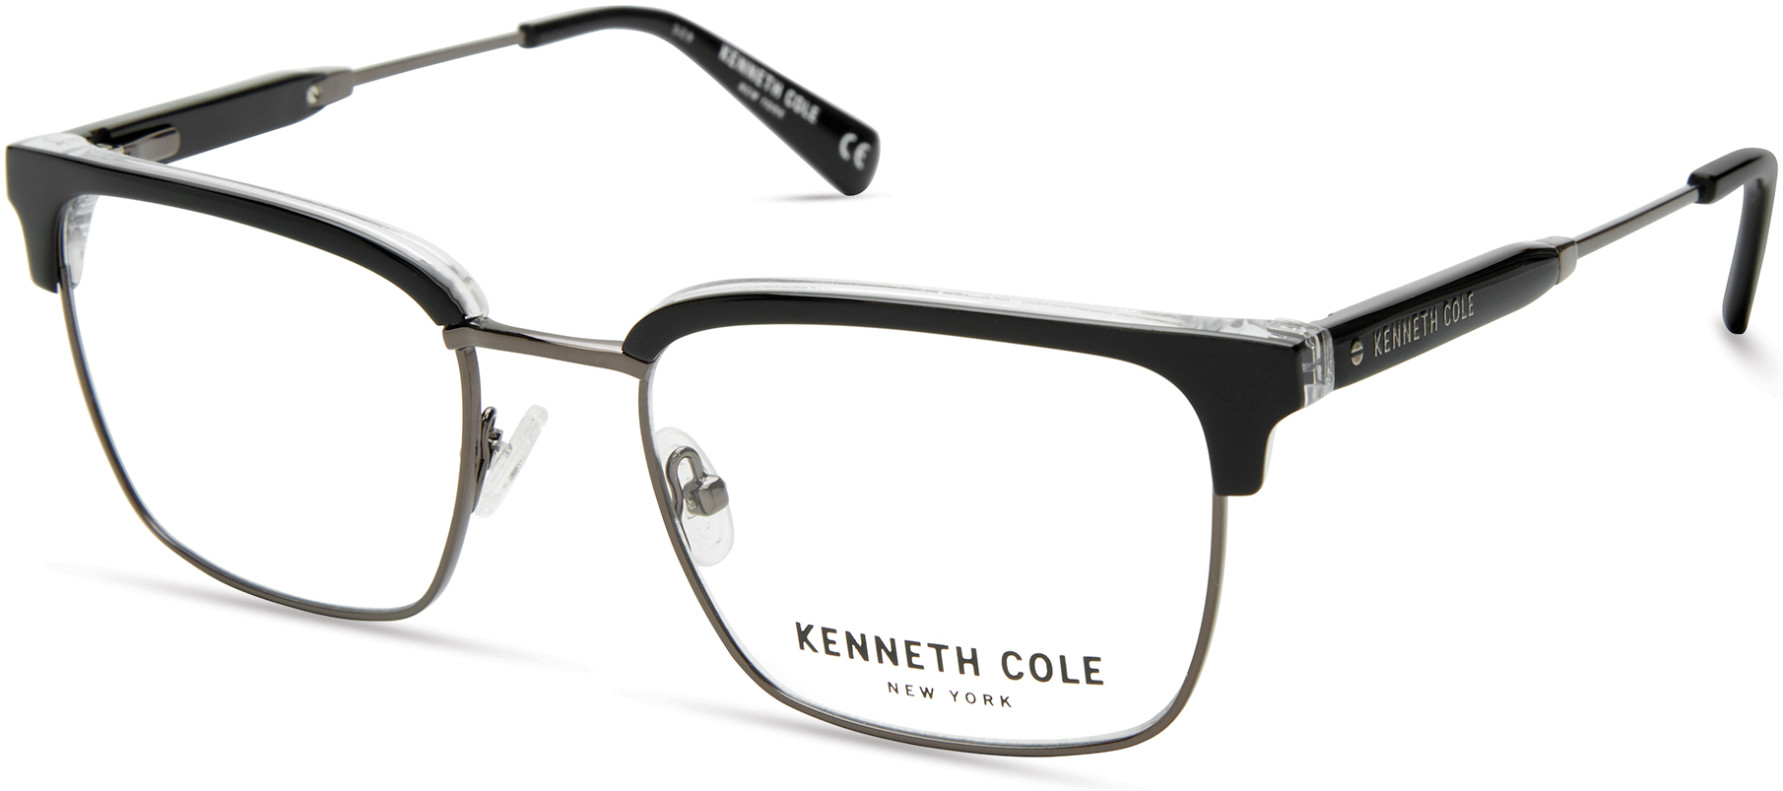 KENNETH COLE NY 0303